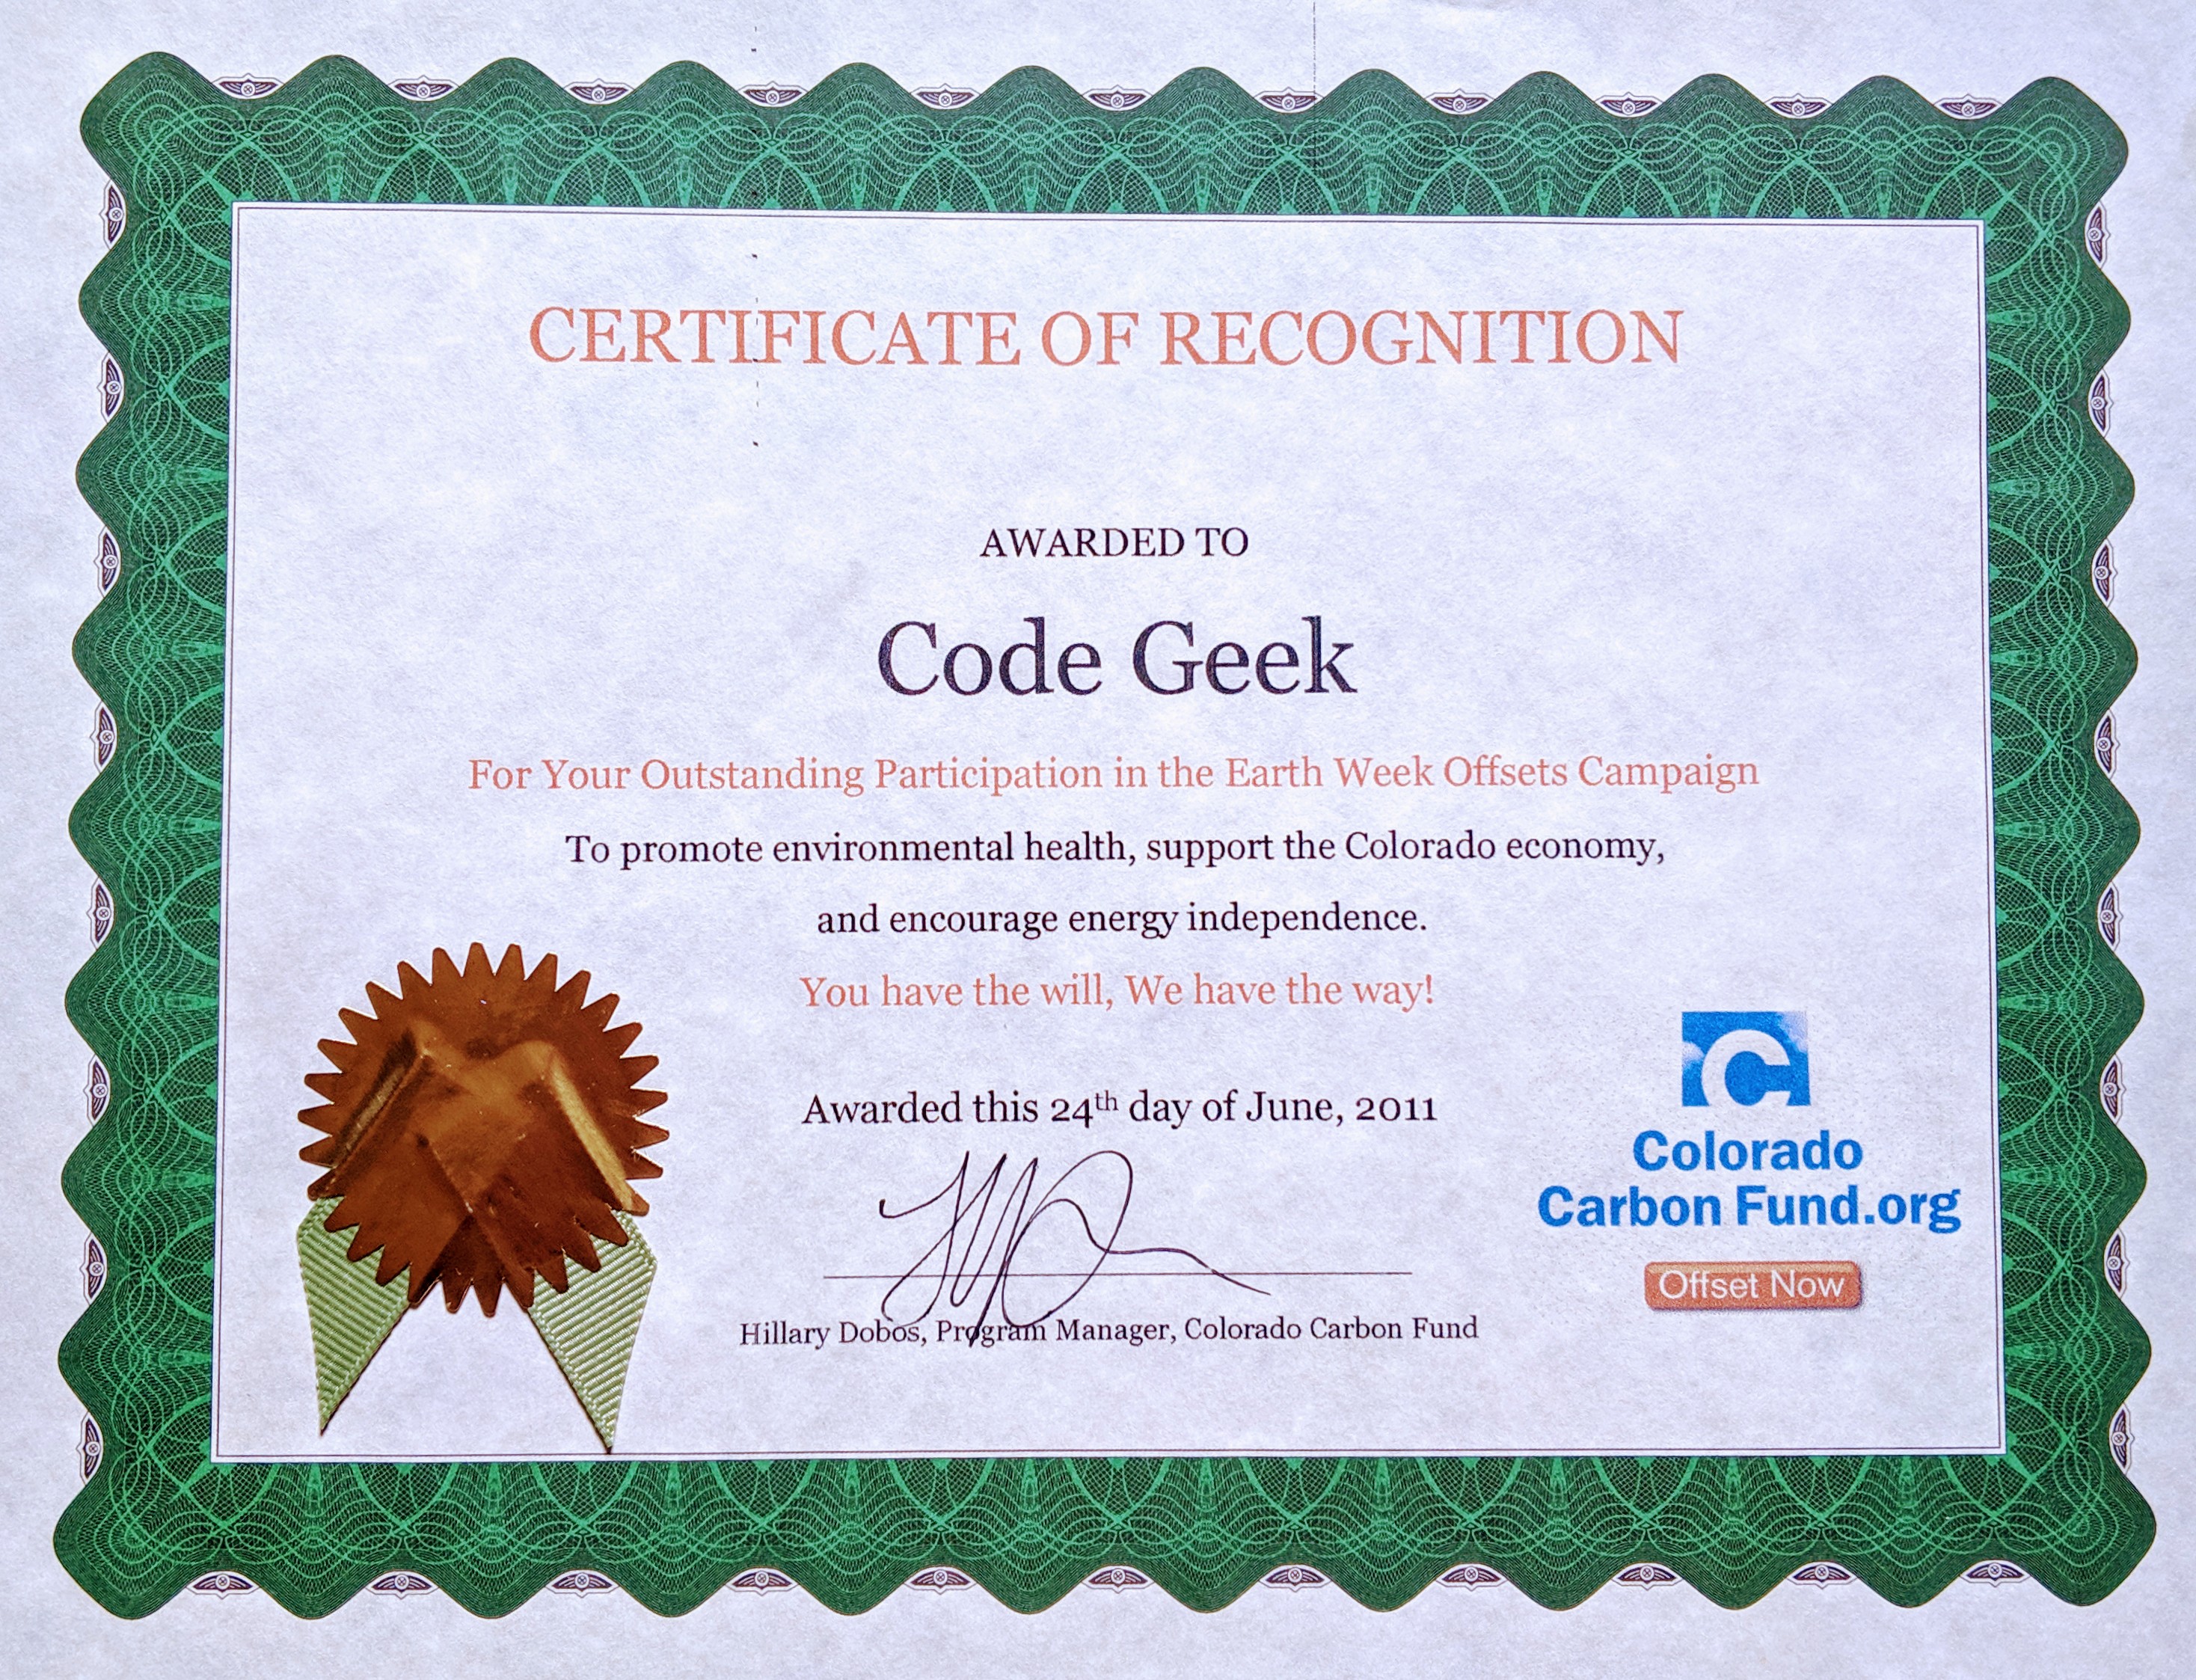 Certificate of Recognition awarded by Colorado Carbon Fund